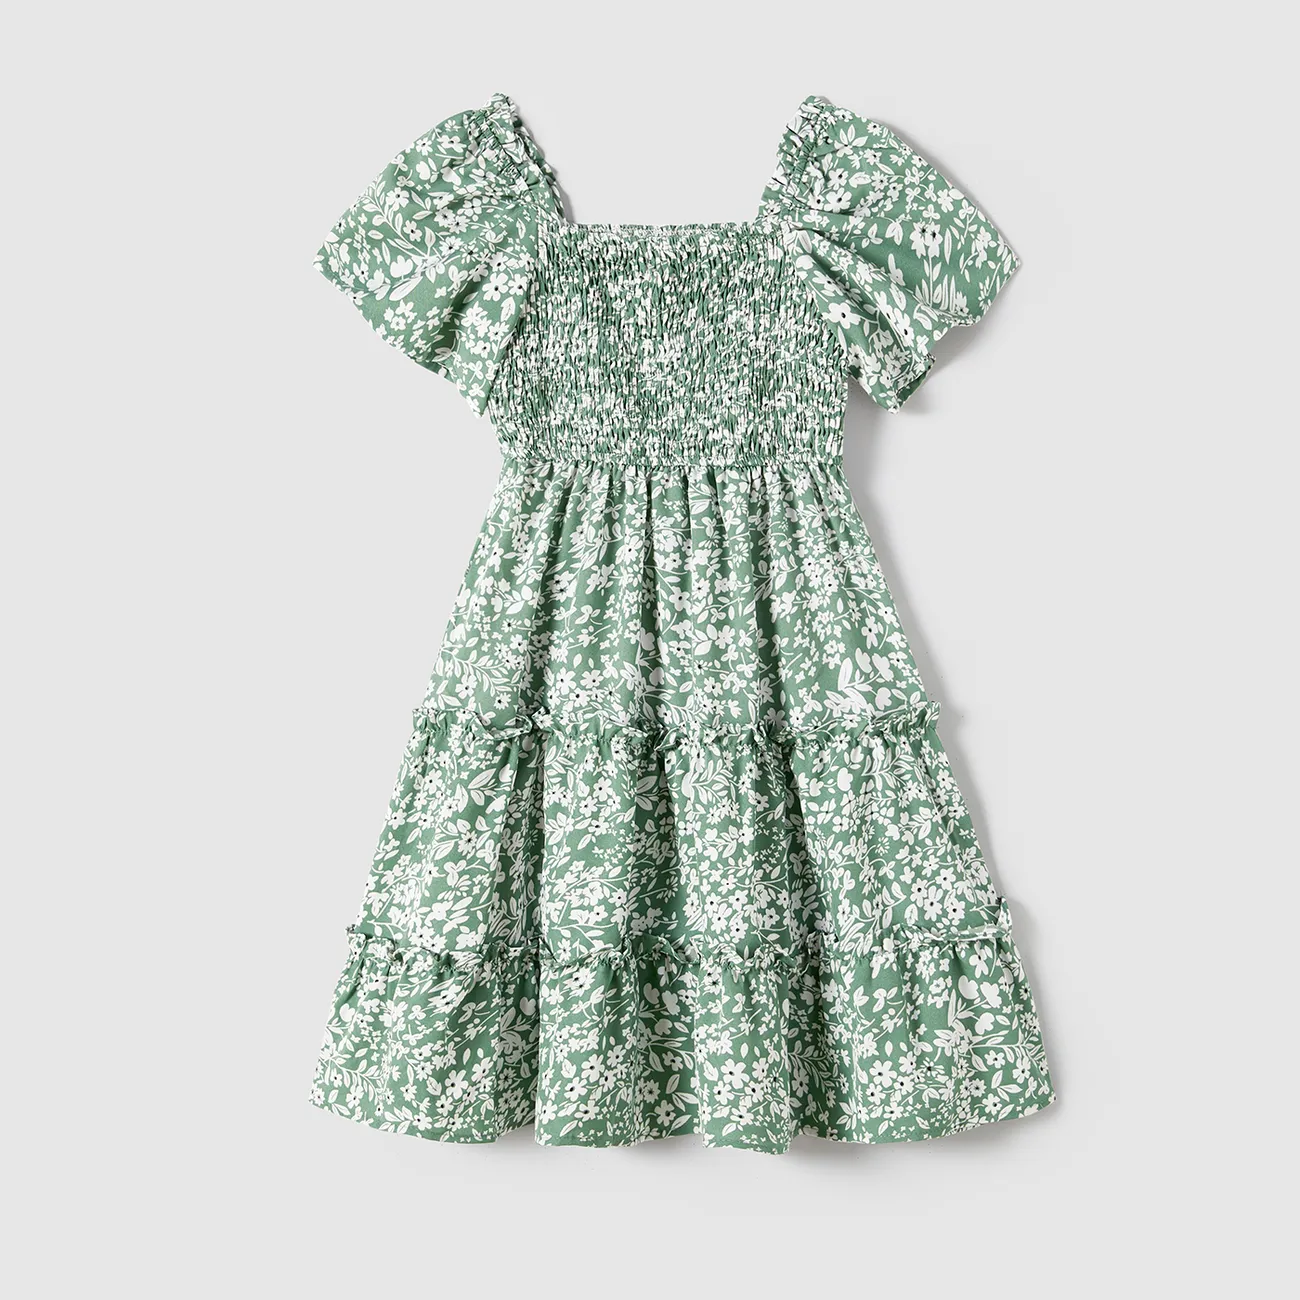 Family Matching Allover Floral Print Smocked Dresses and Colorblock Striped Cotton T-shirts Sets Green big image 1